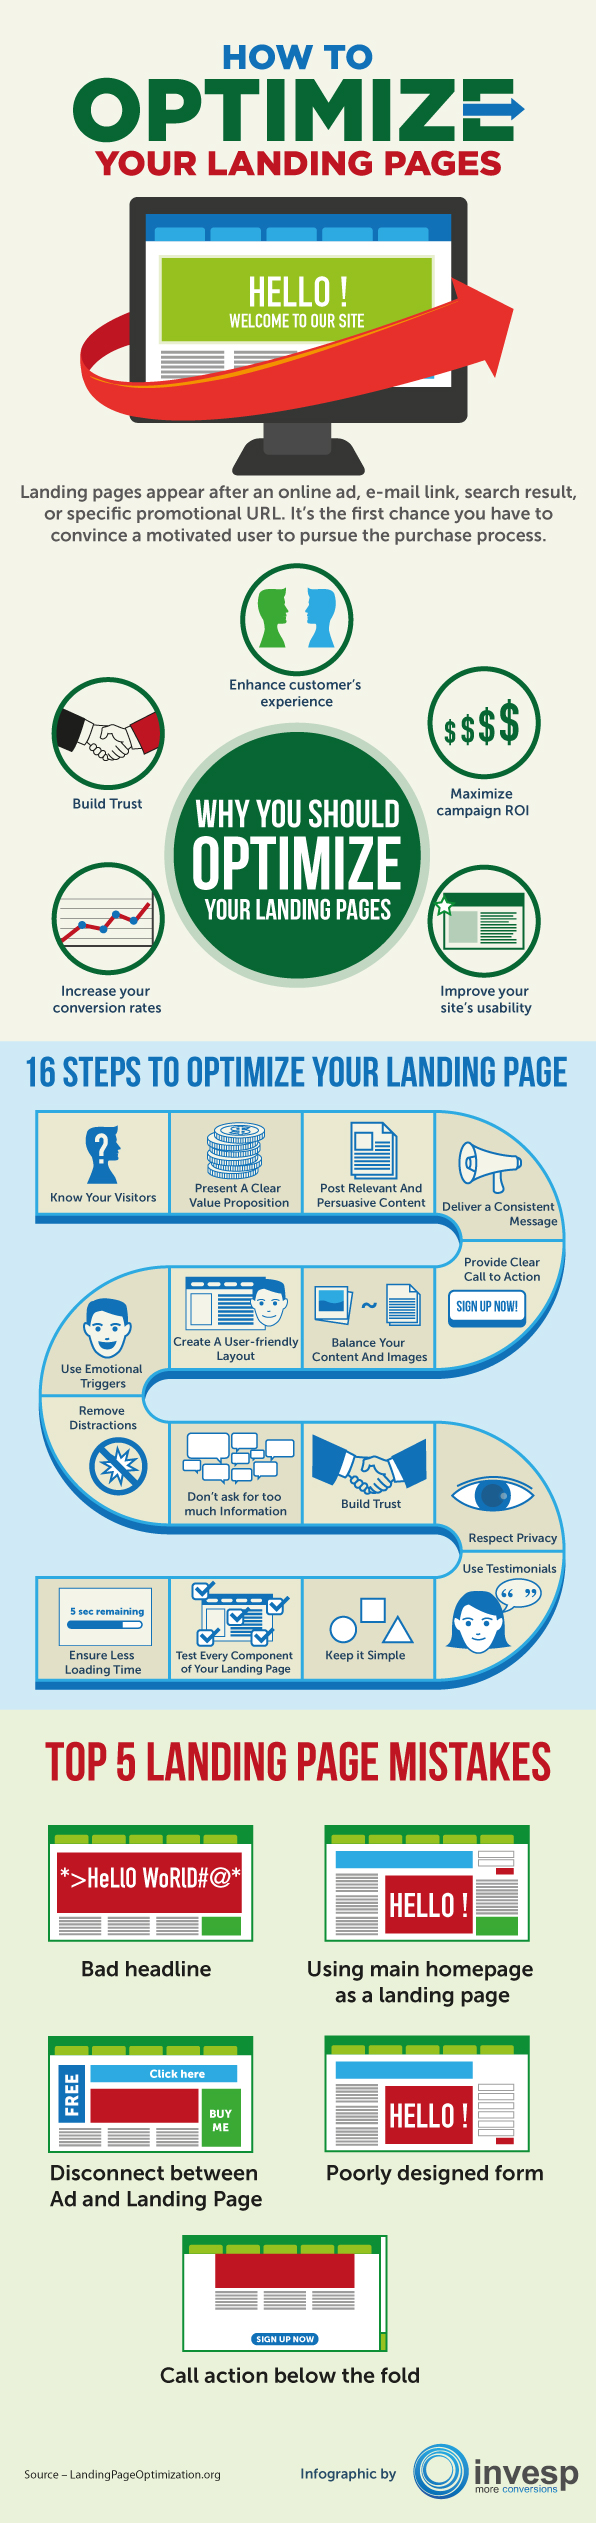 Learn-To-Optimize-Your-Landing-Pages-infographic